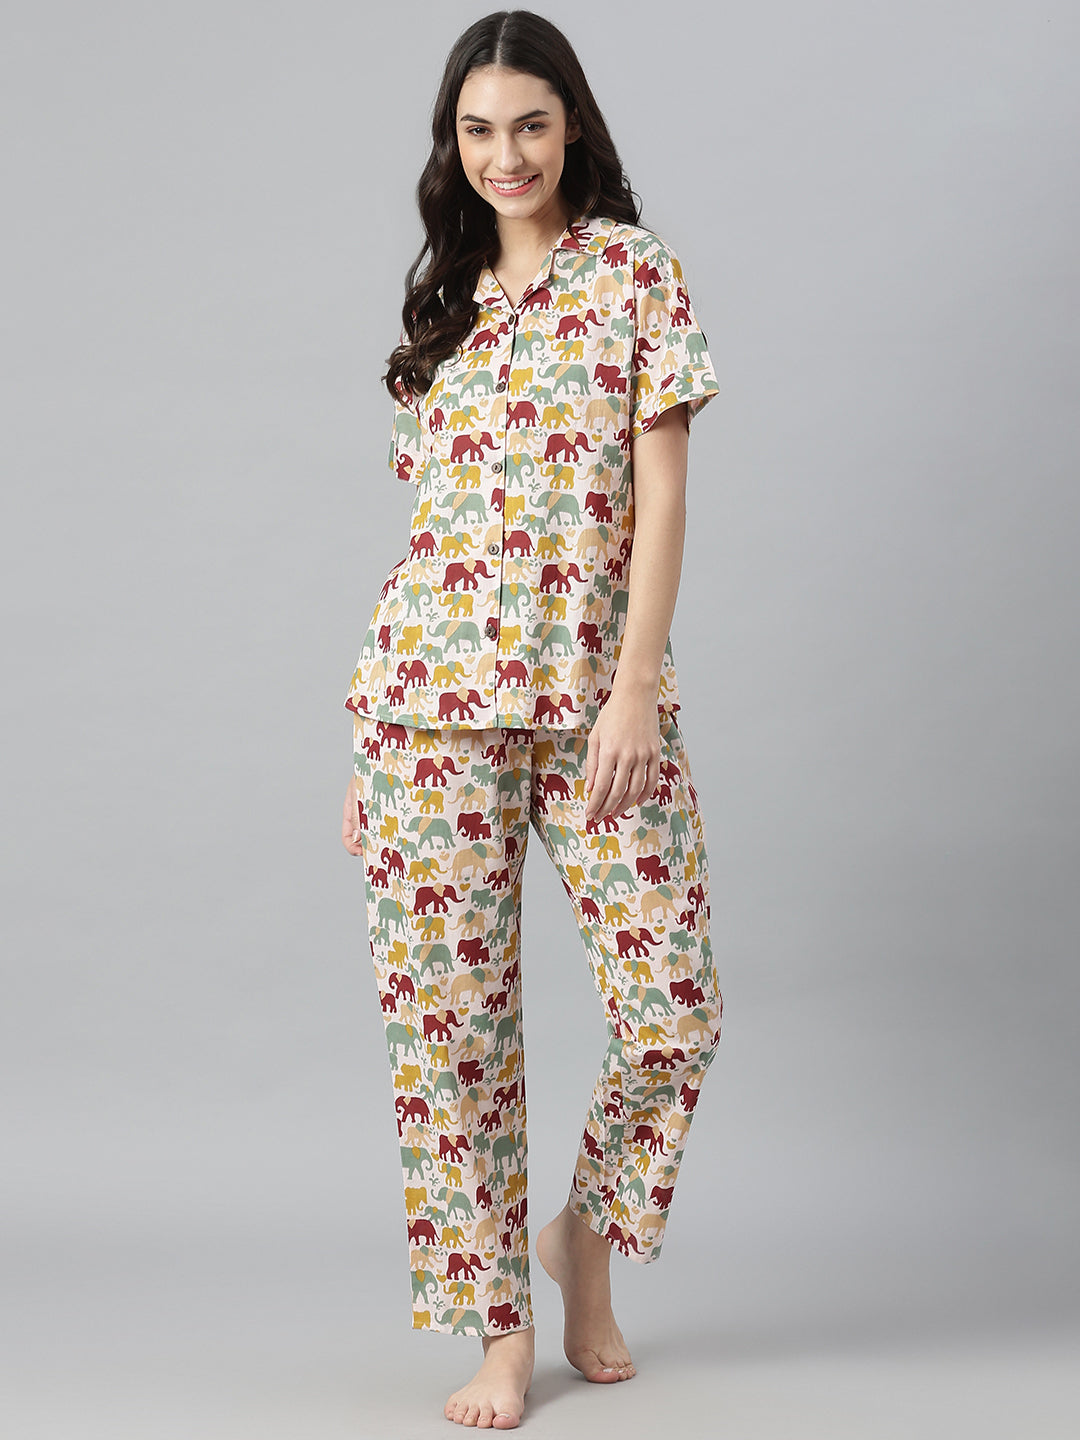 COTTON WHITE PRINTED CO-ORD SHORT NIGHT SUIT WITH CUTE DOTS